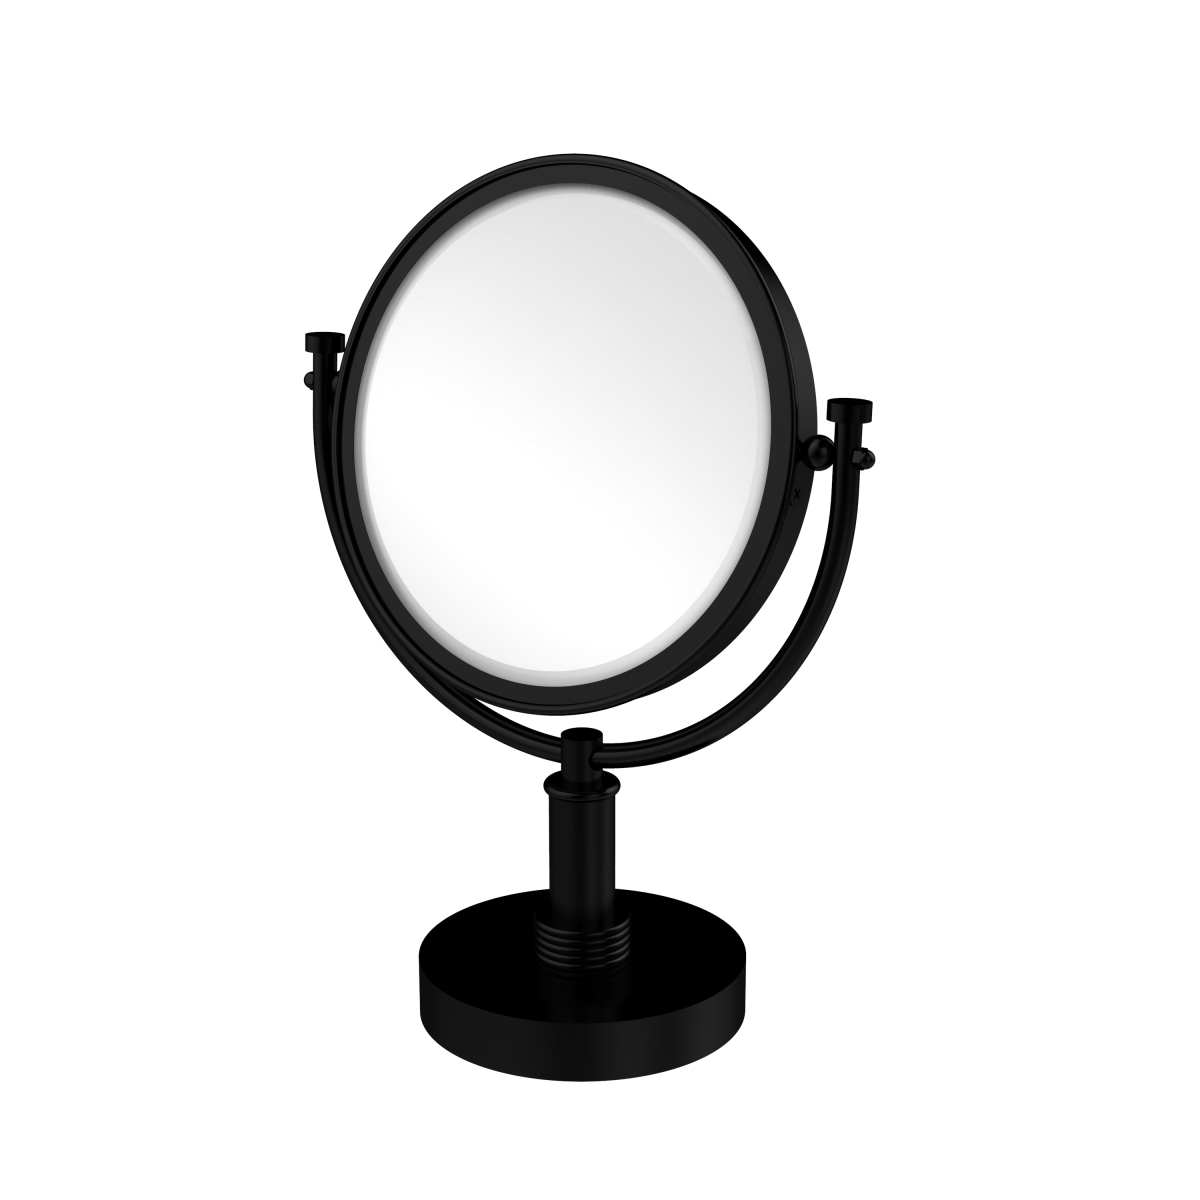 Dm-4g-2x-bkm Grooved Ring Style 8 In. Vanity Top Make-up Mirror 2x Magnification, Matte Black